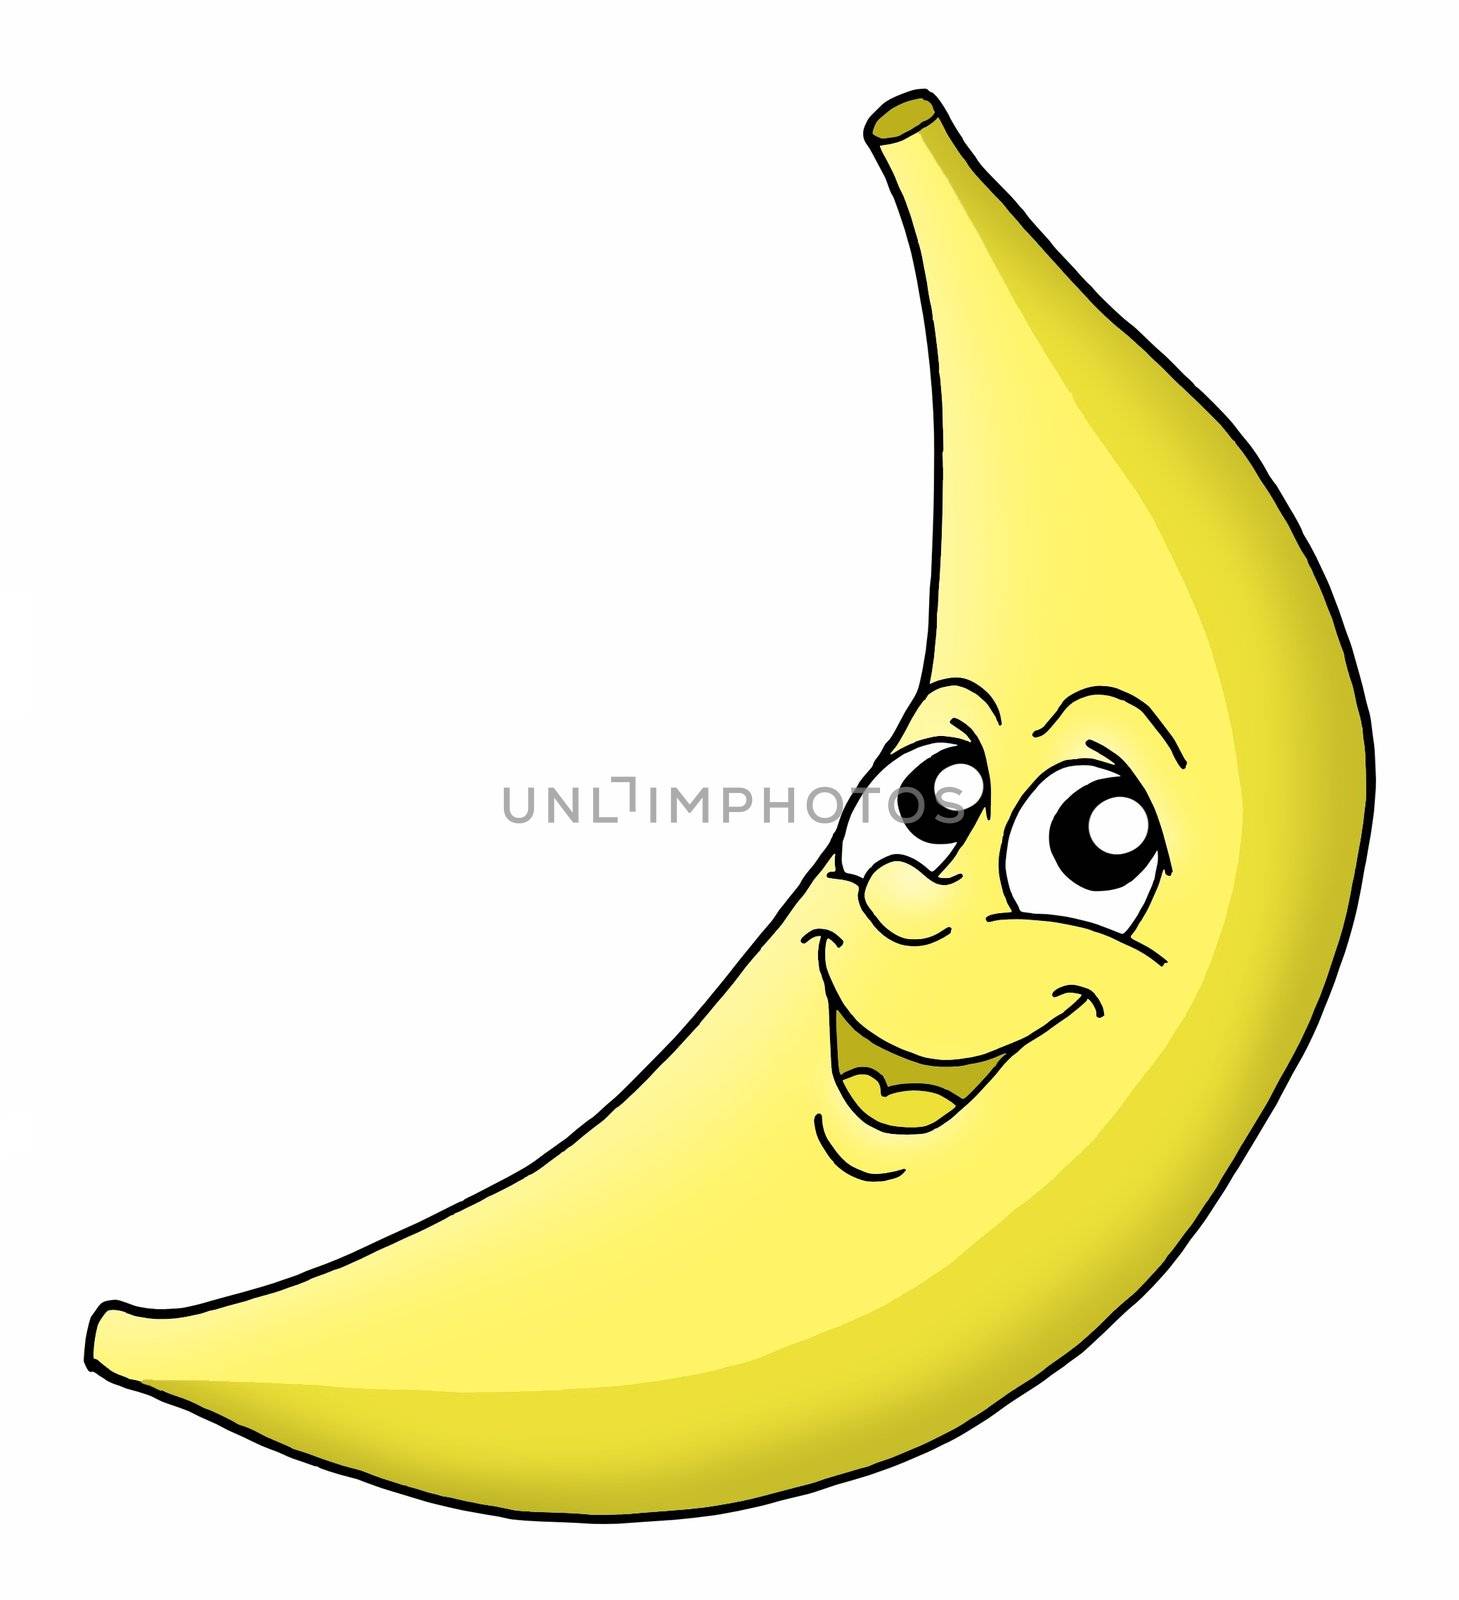 Smiling banana by clairev